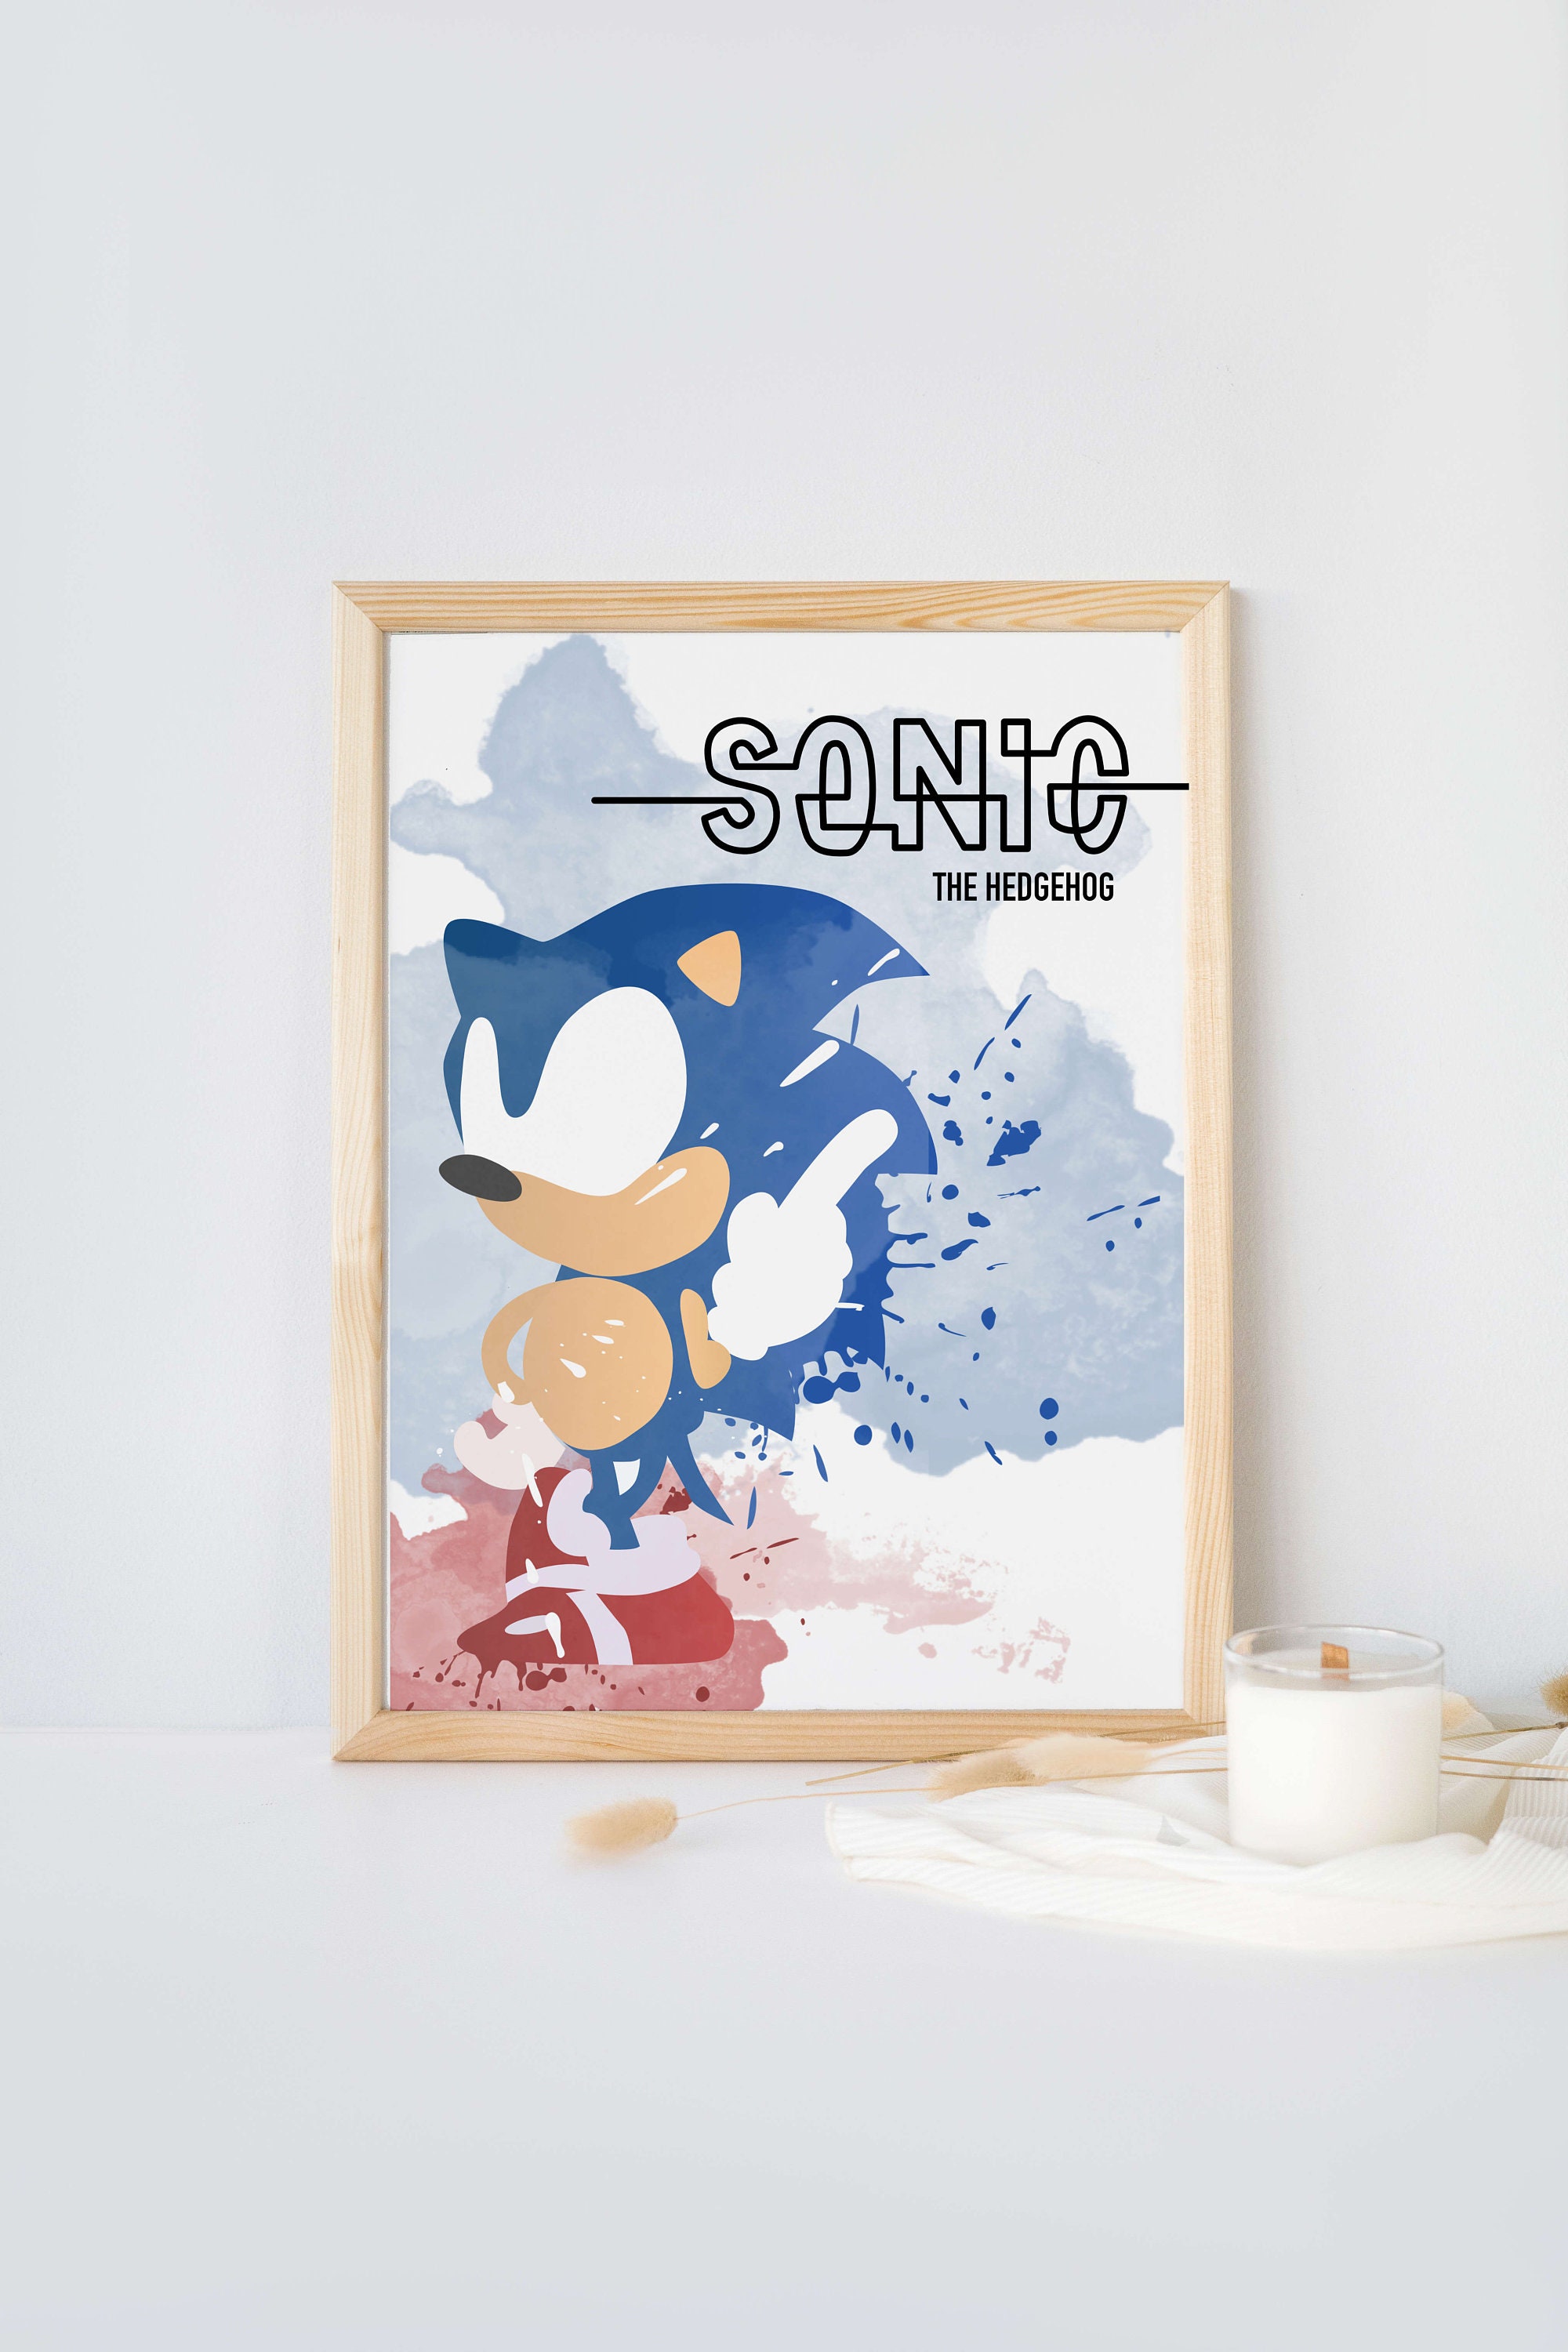 This could the poster promotional of Sonic The Hedgehog 3 movie :  r/SonicTheMovie